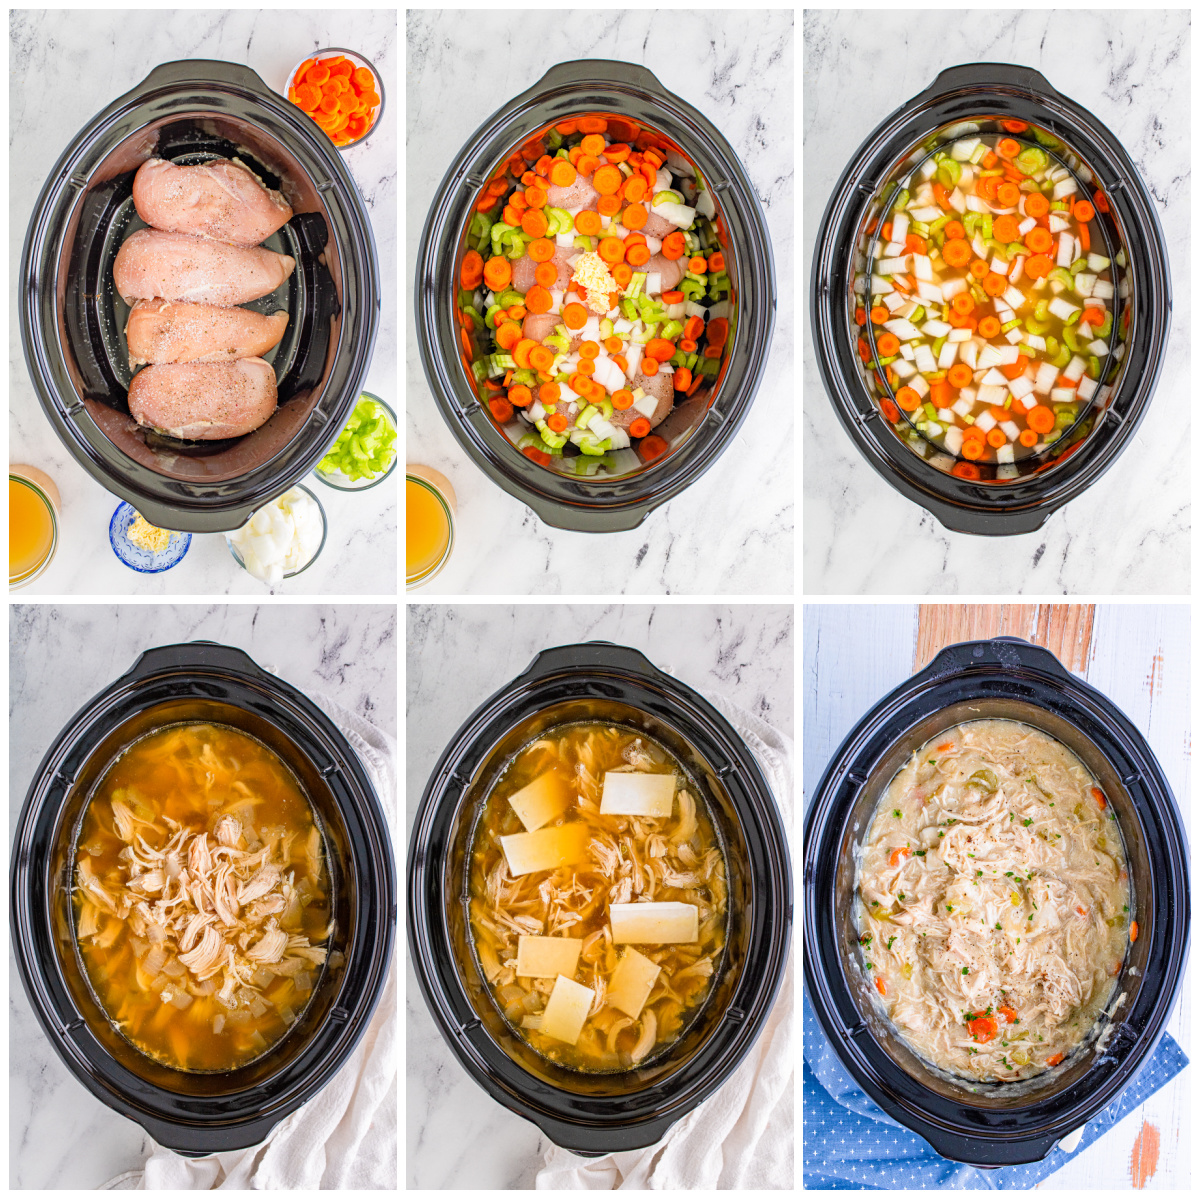 Step by step photos on how to make Slow Cooker Chicken and Dumplings